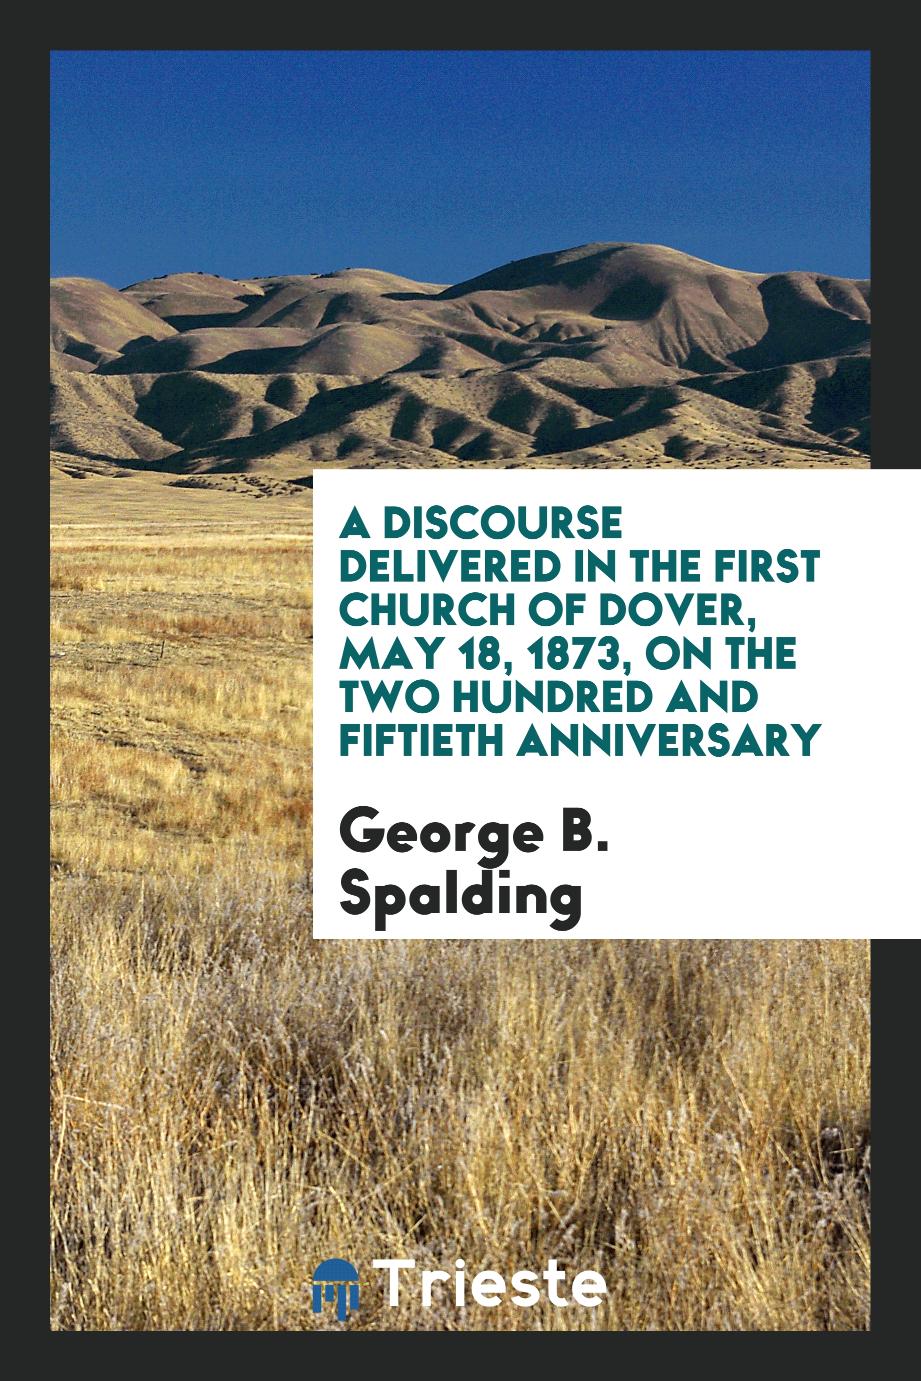 A discourse delivered in the first church of dover, may 18, 1873, on the two hundred and fiftieth anniversary